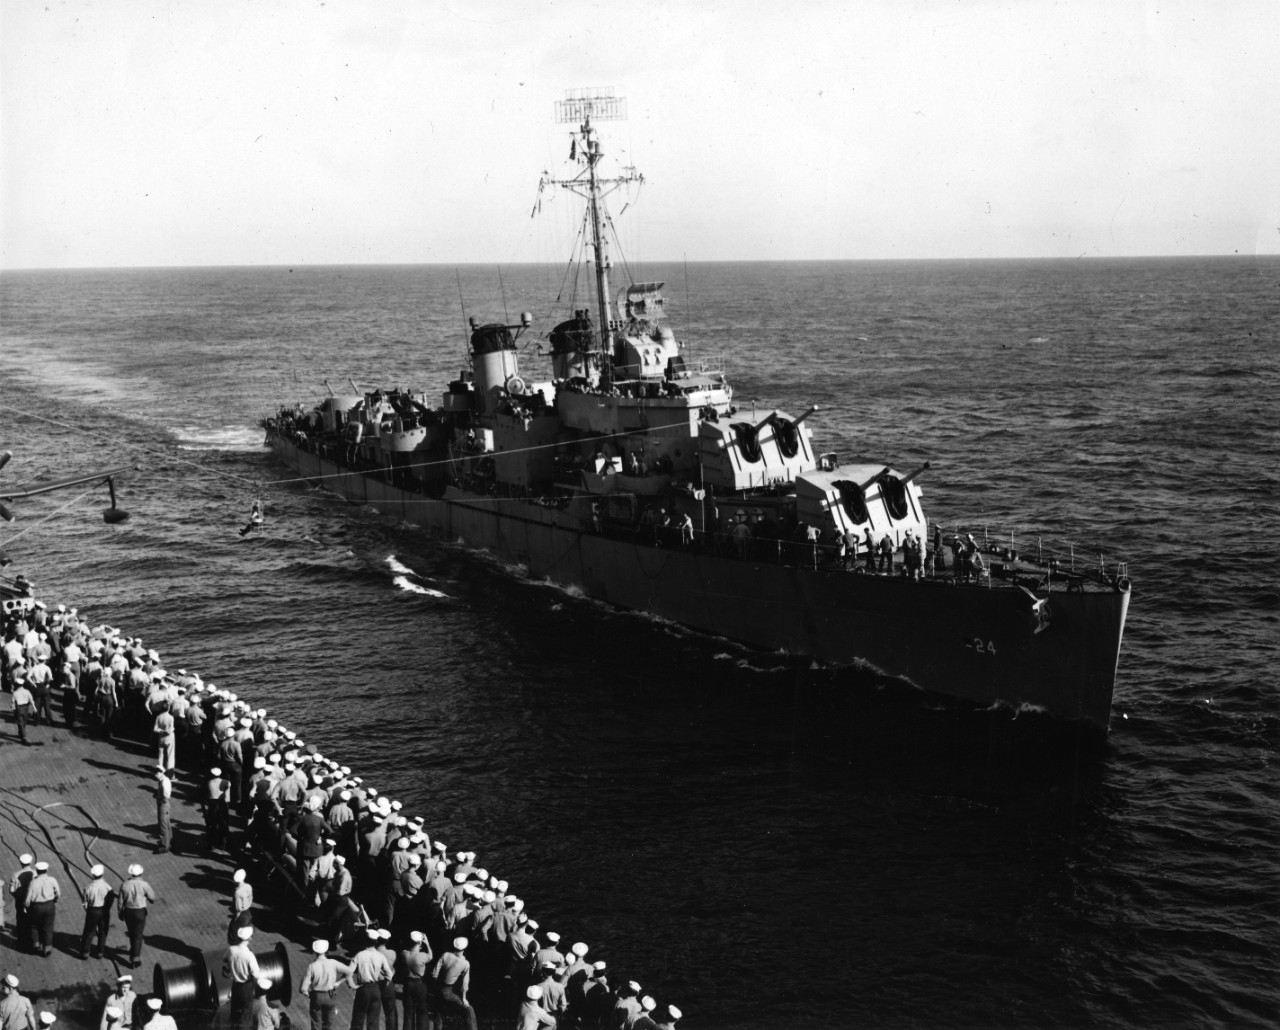 The transfer of personnel by high line from the battleship USS Wisconsin (BB-64) to the destroyer mine layer USS Thomas E. Fraser (DM-24) attracts a large crowd of spectators from the mixed crew of Reserves and Regulars on board Wisconsin. Photo taken during the two week Naval Reserve training cruise to Cristobal Canal Zone.